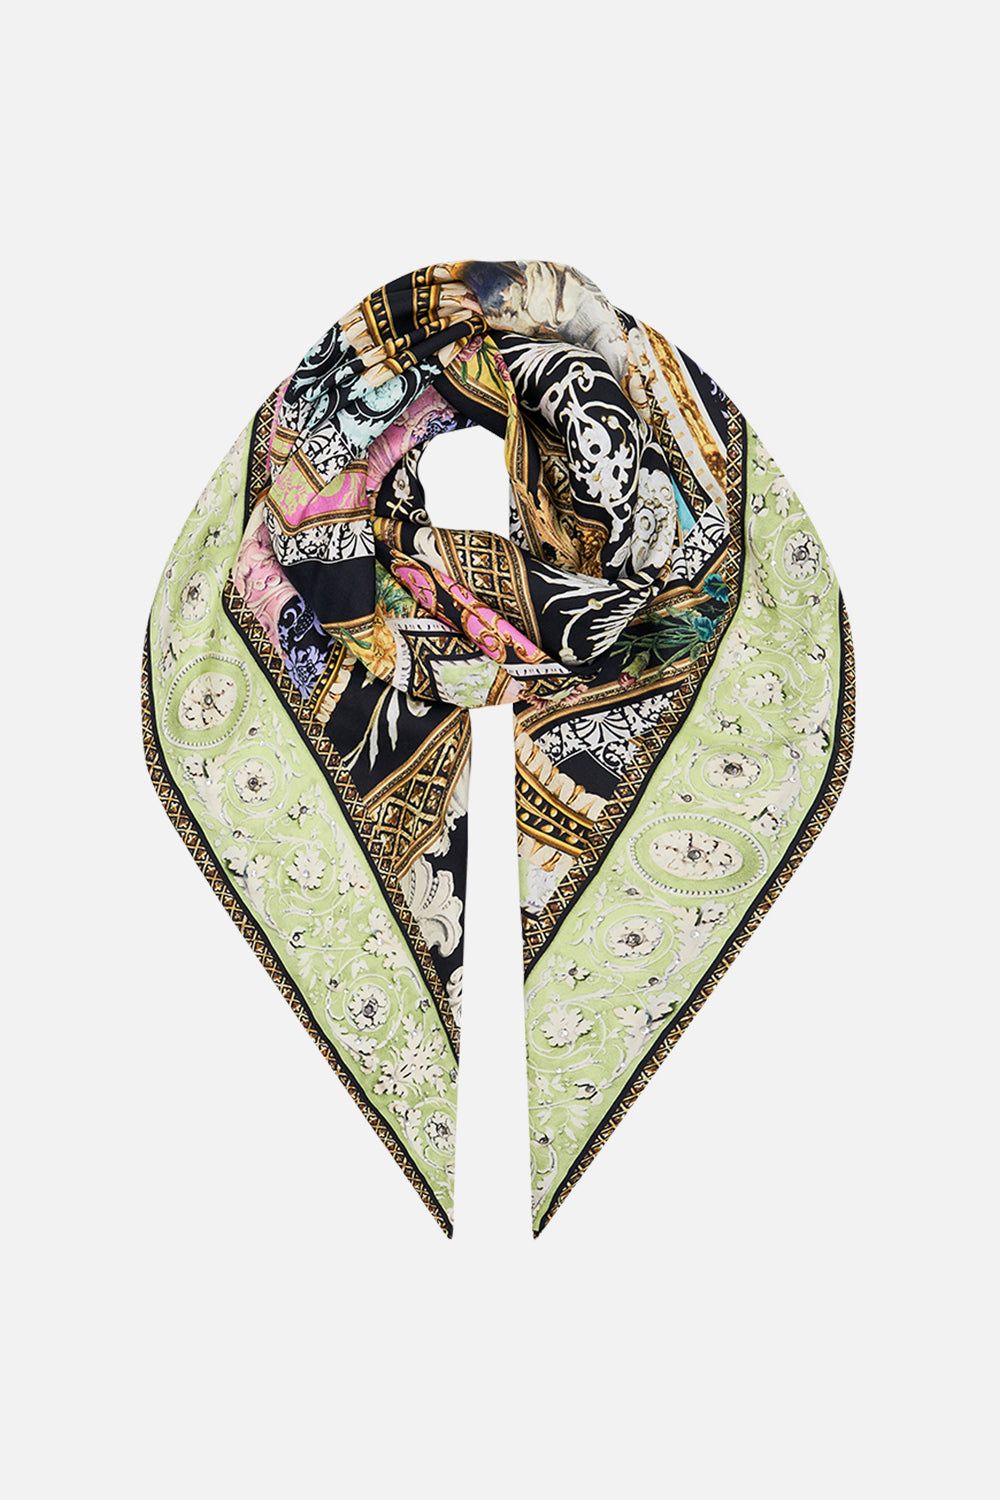 Product view of CAMILLA silk scarf in Florence Field Day print